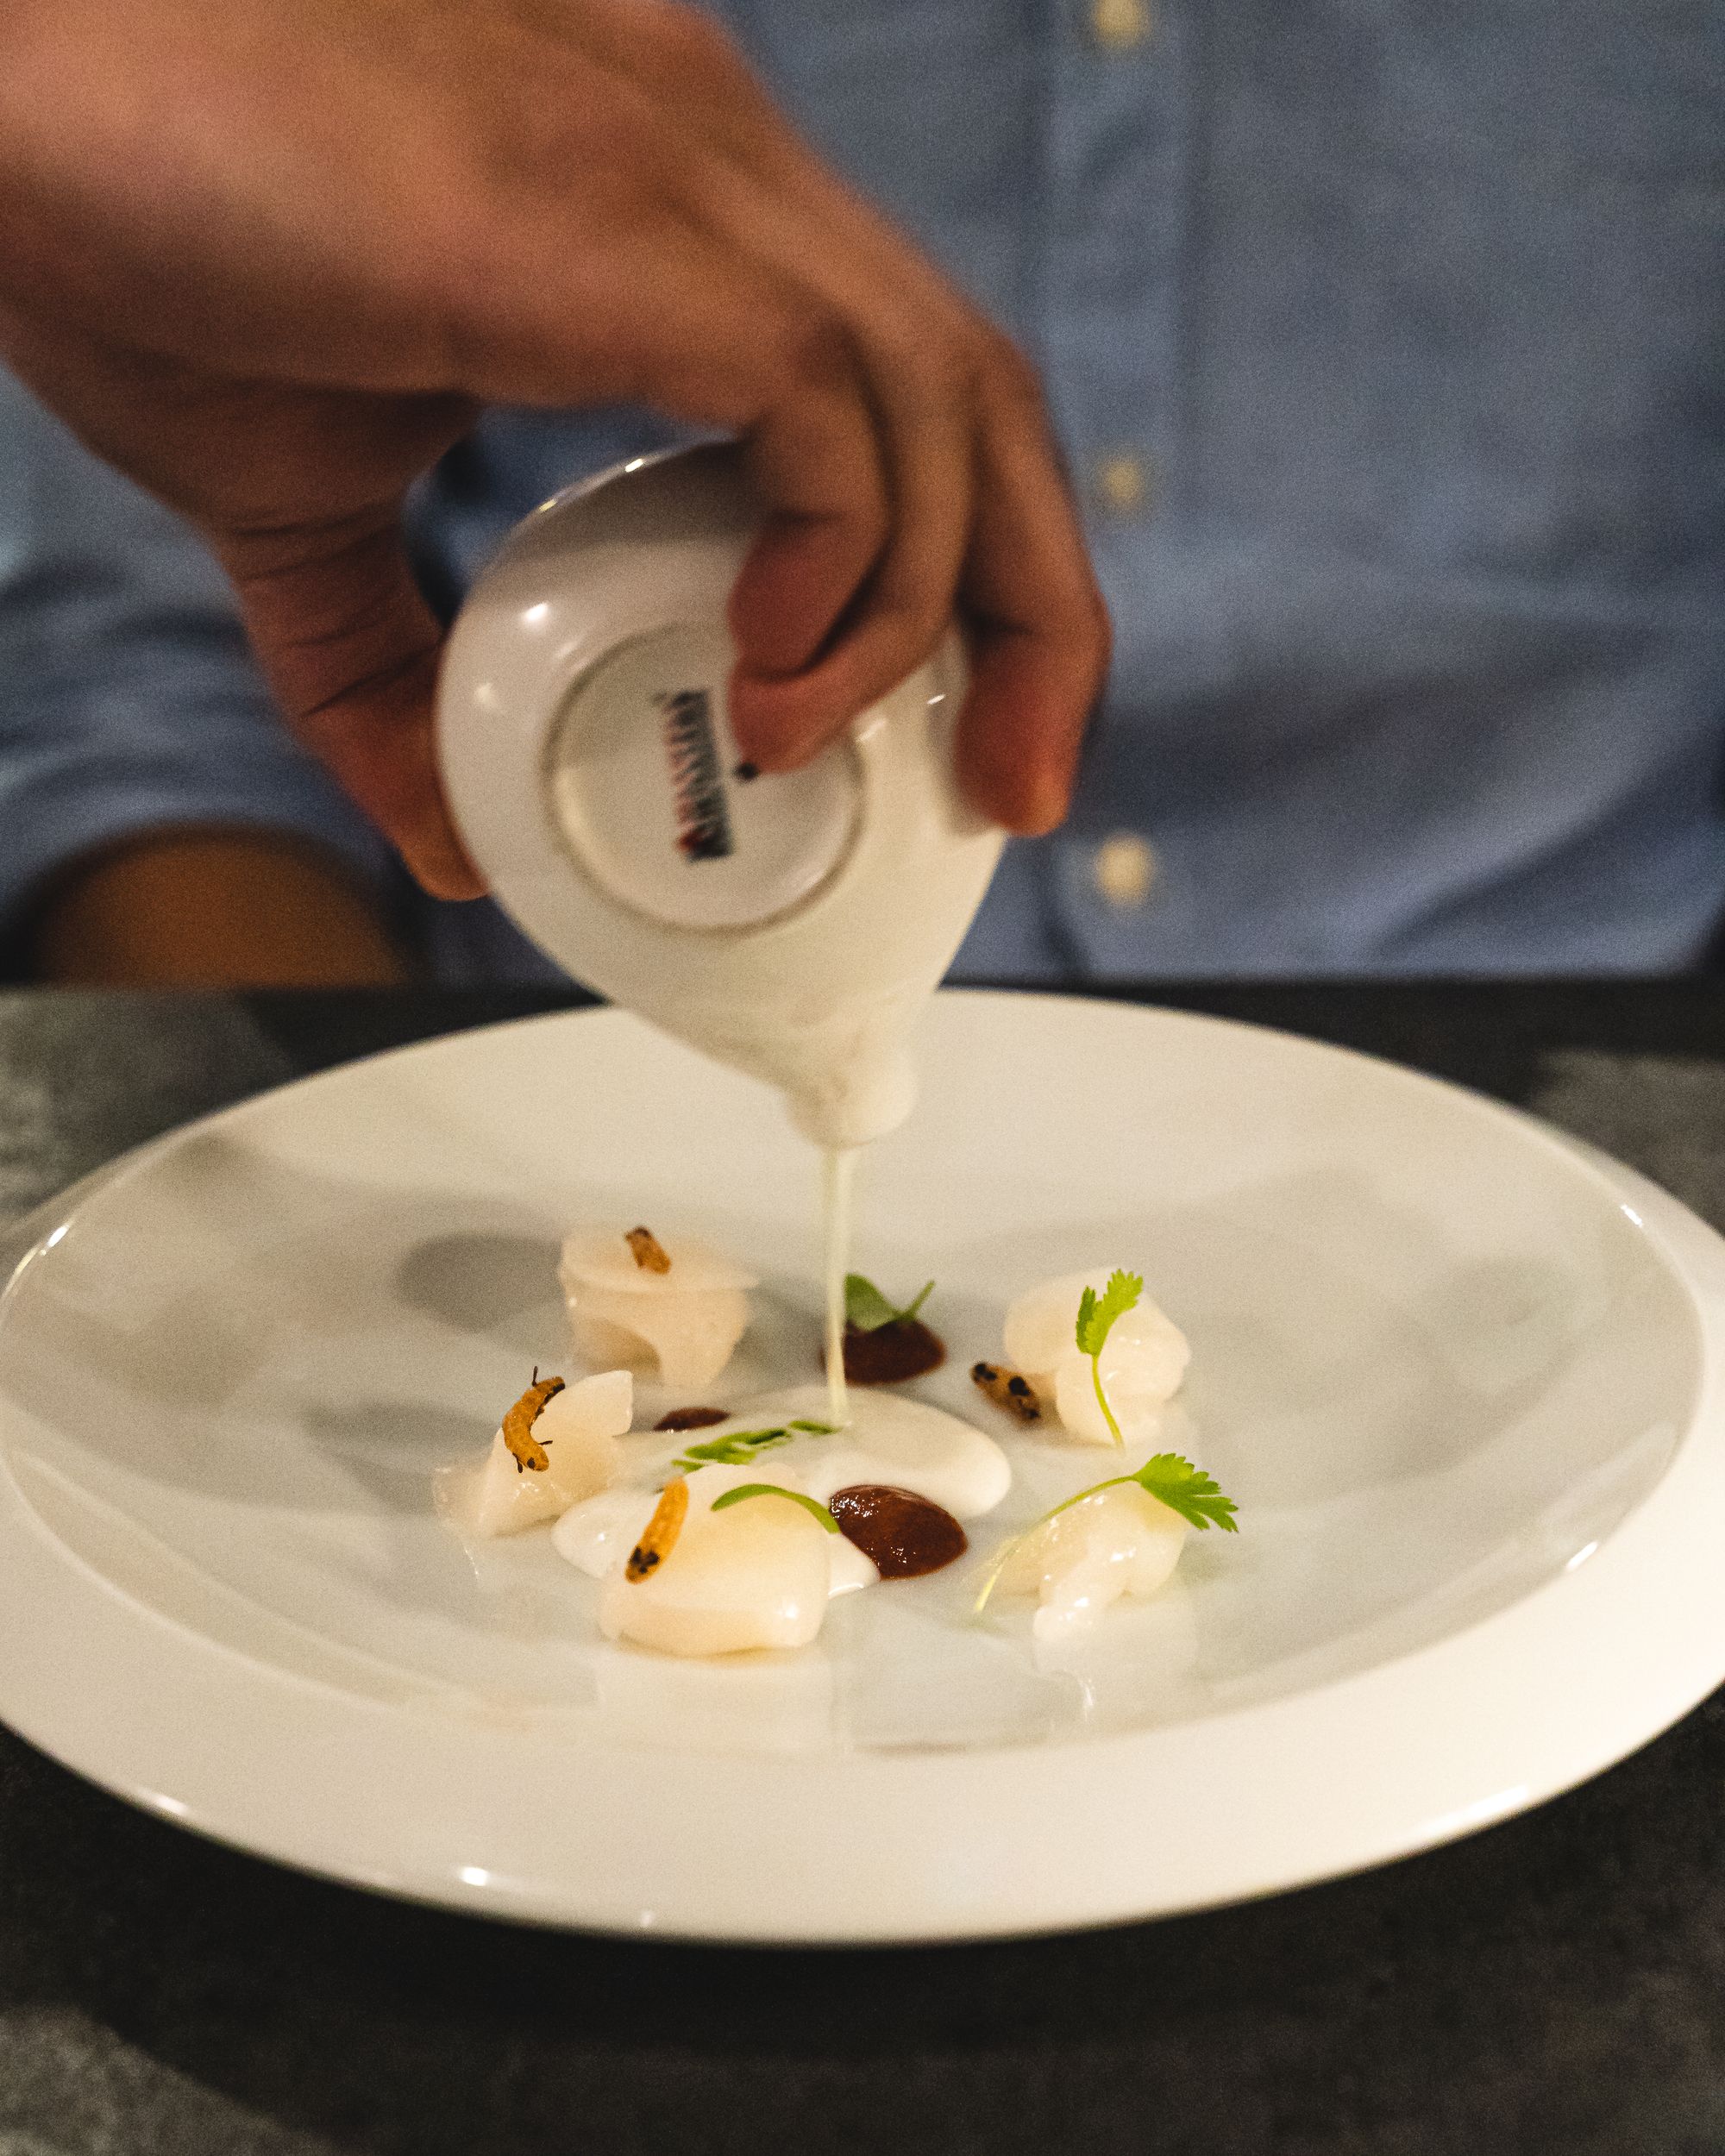 Sauce being poured onto a dish with scallops